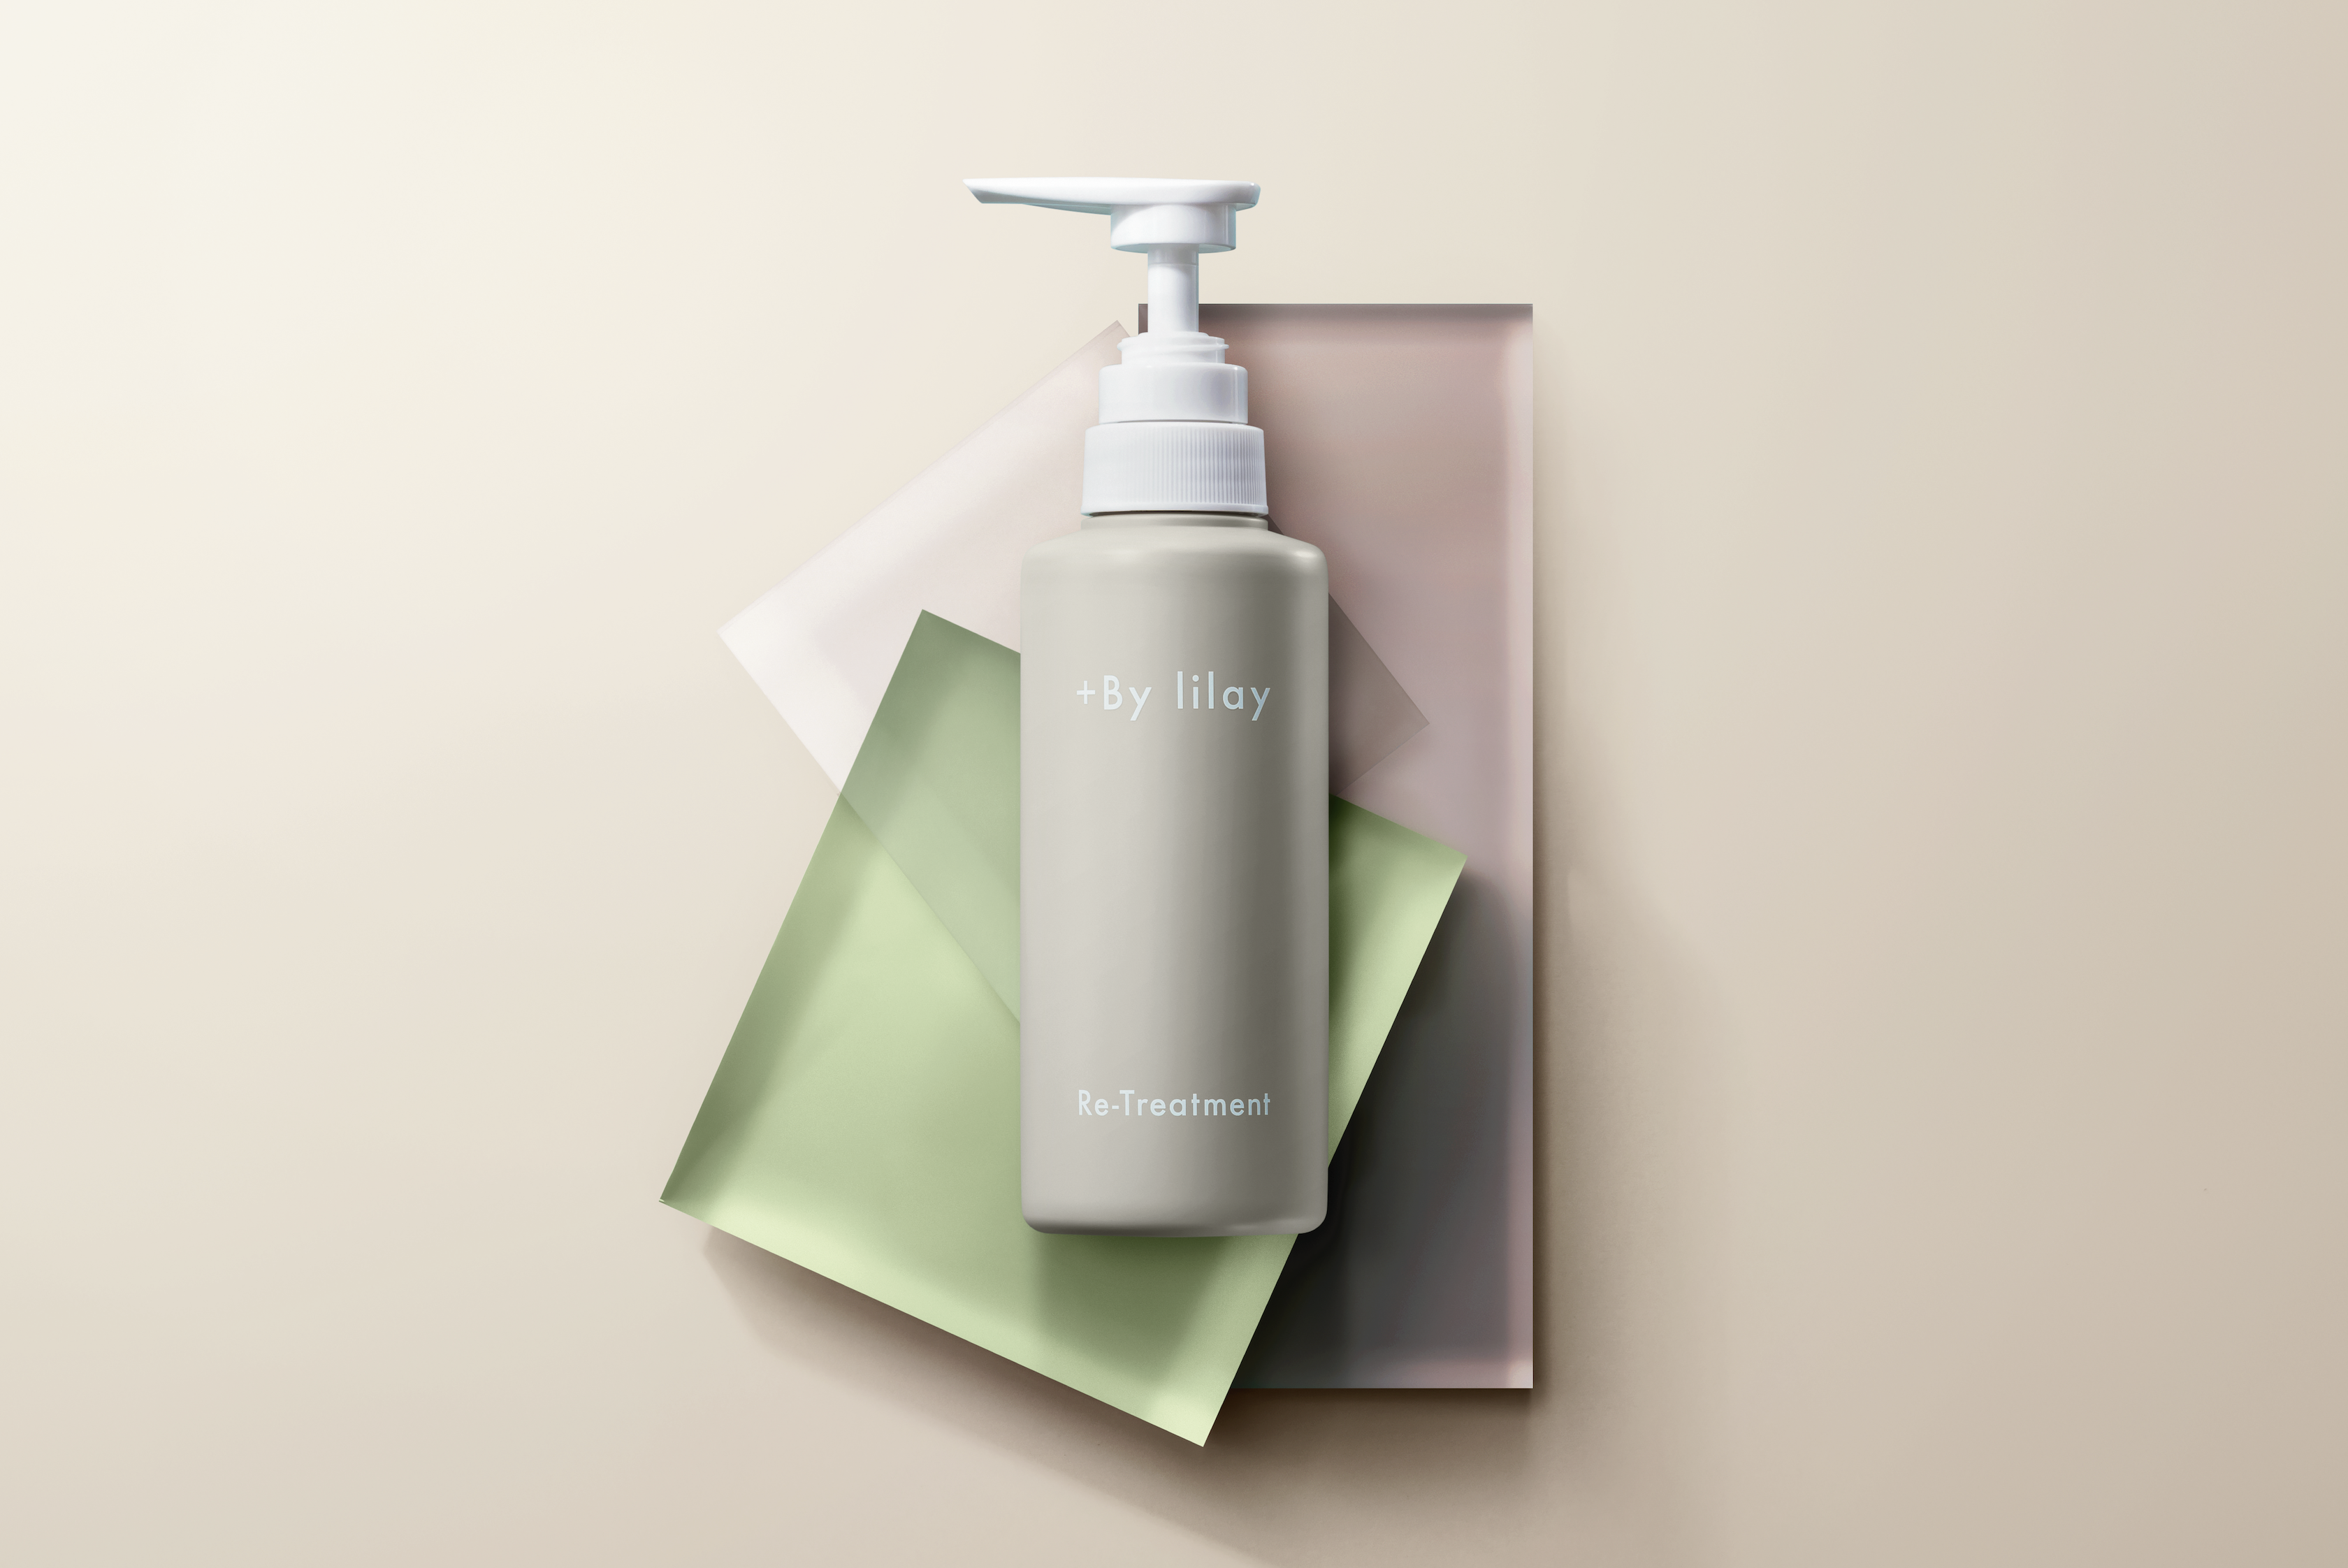 +By lilay Re-Treatment 300ml